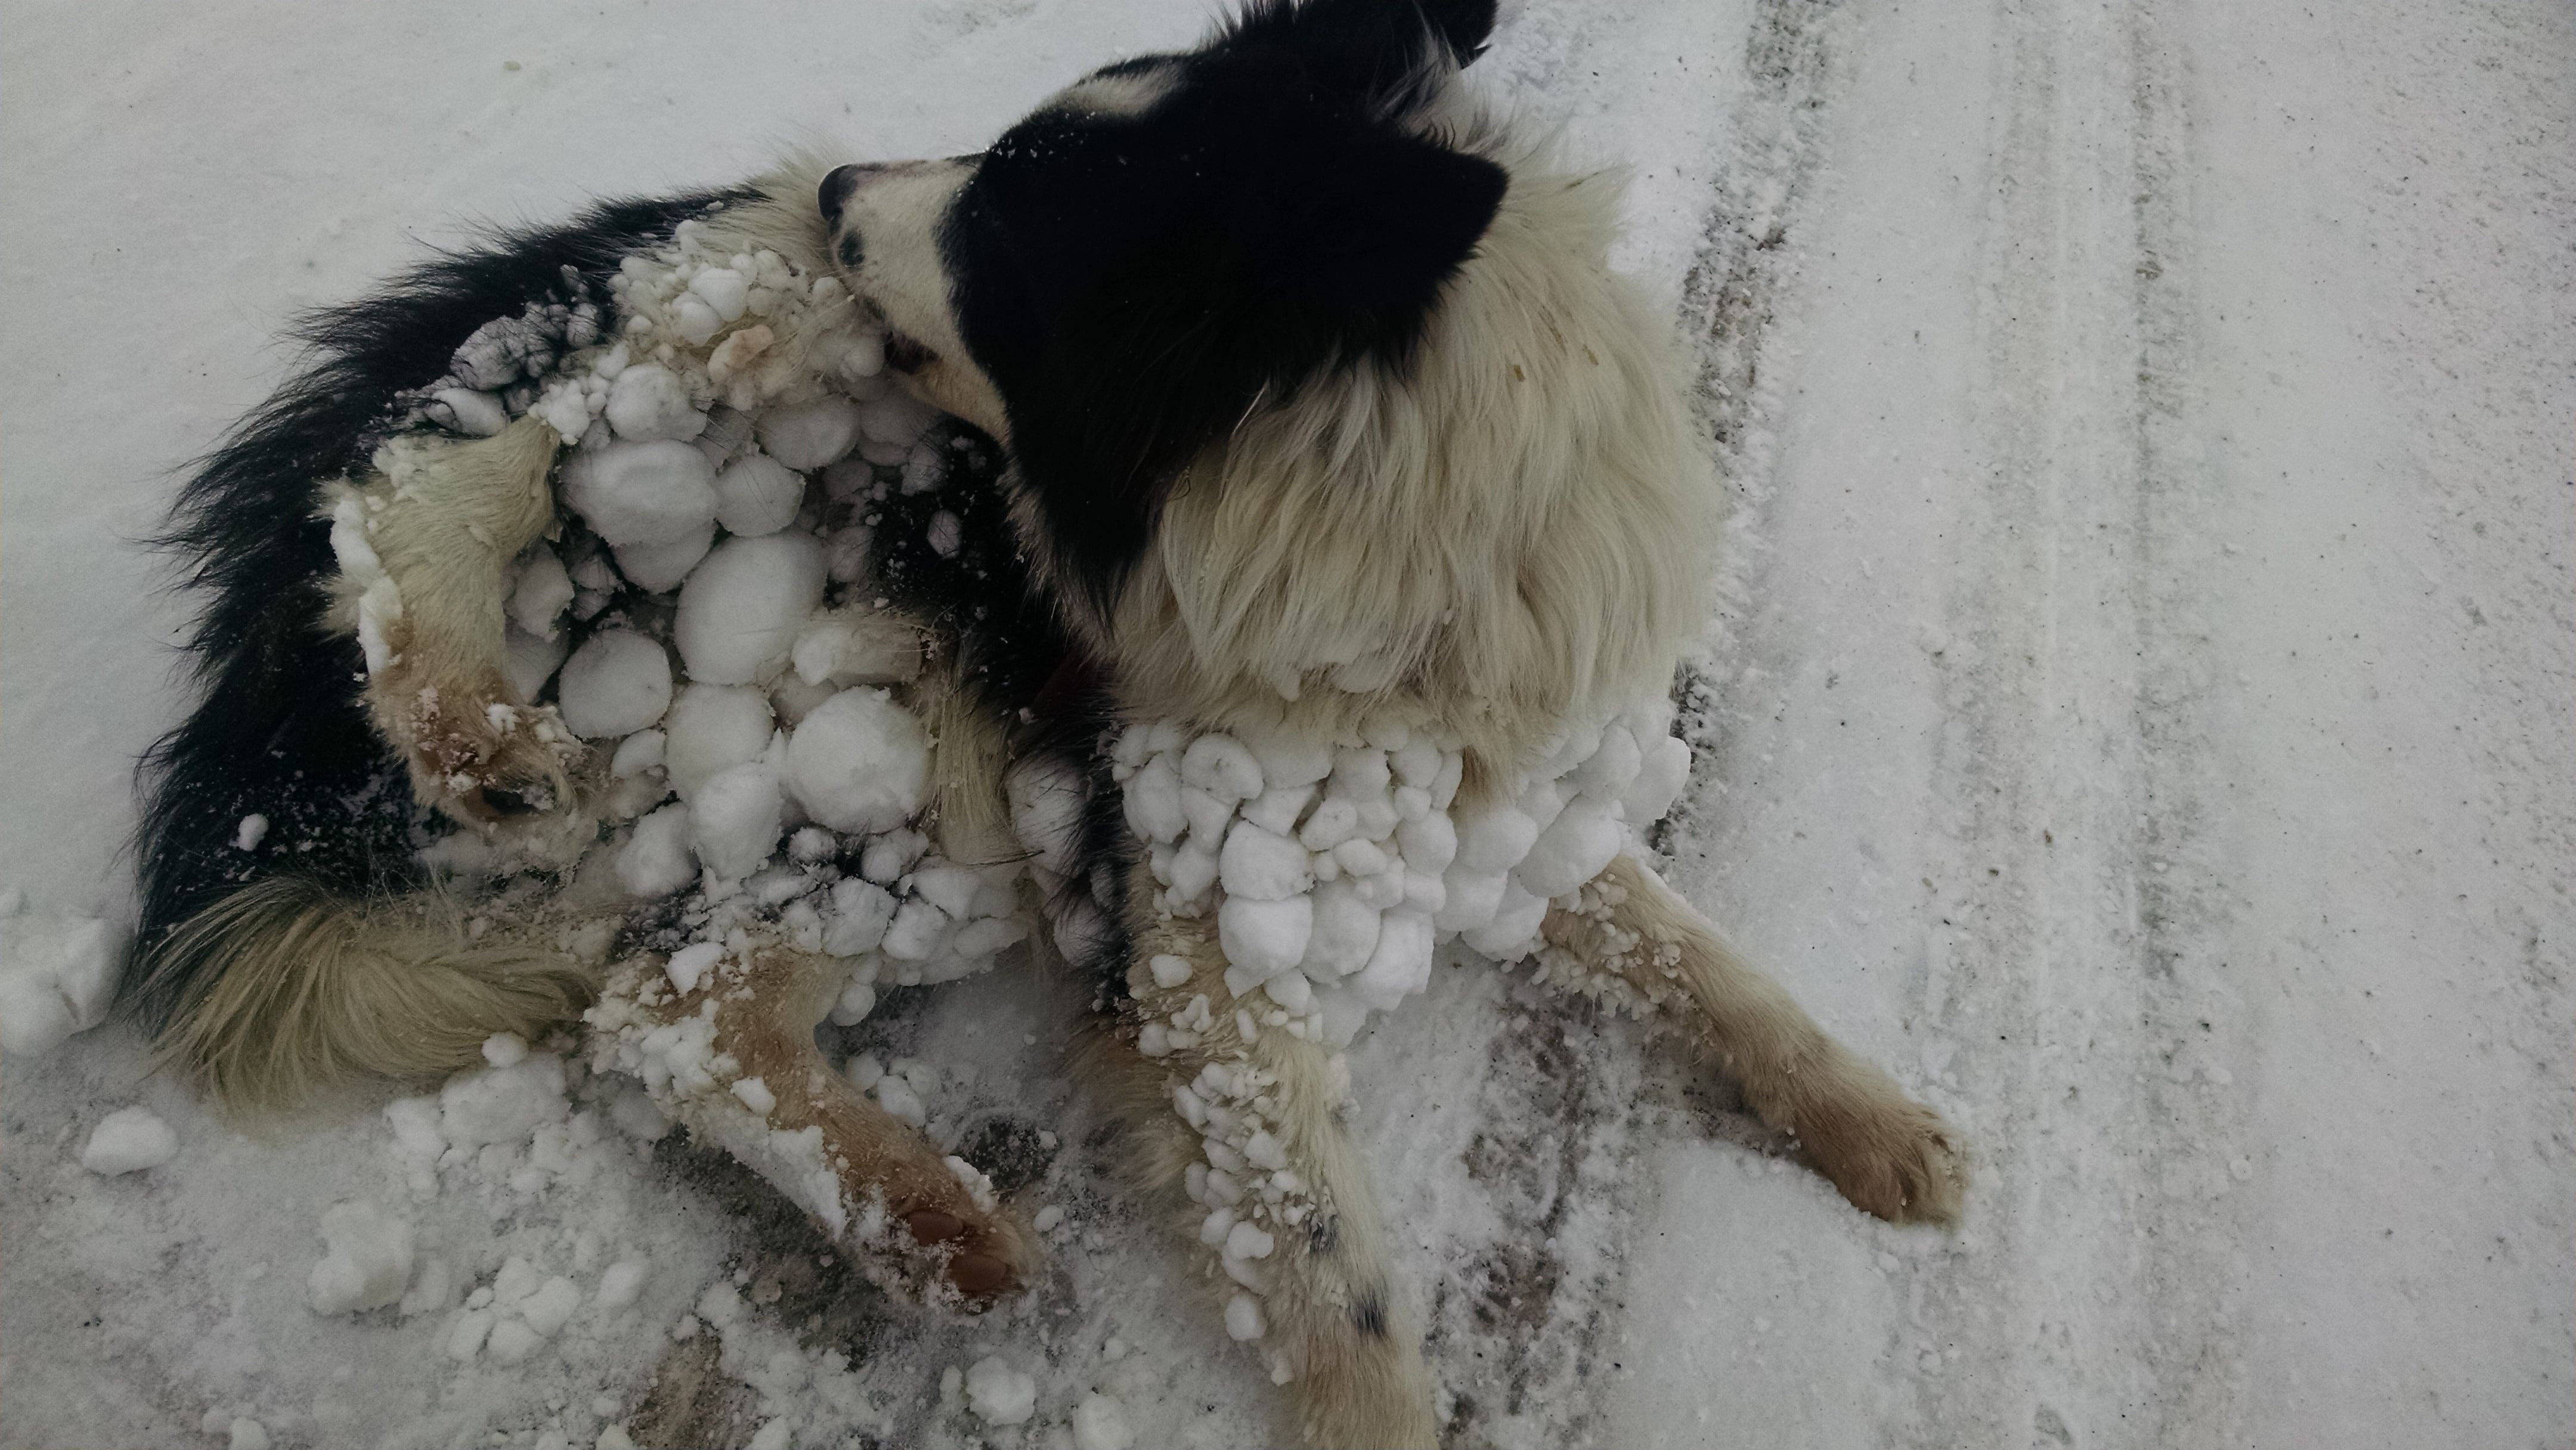 Lando accompanied me on the 3 mile hike.  The snow was up to his chin most of the way, but he took the whole thing at full speed.  After we got back to the truck, we had to stop for five minutes for him to clear all the snow baubles from his undercarriage.